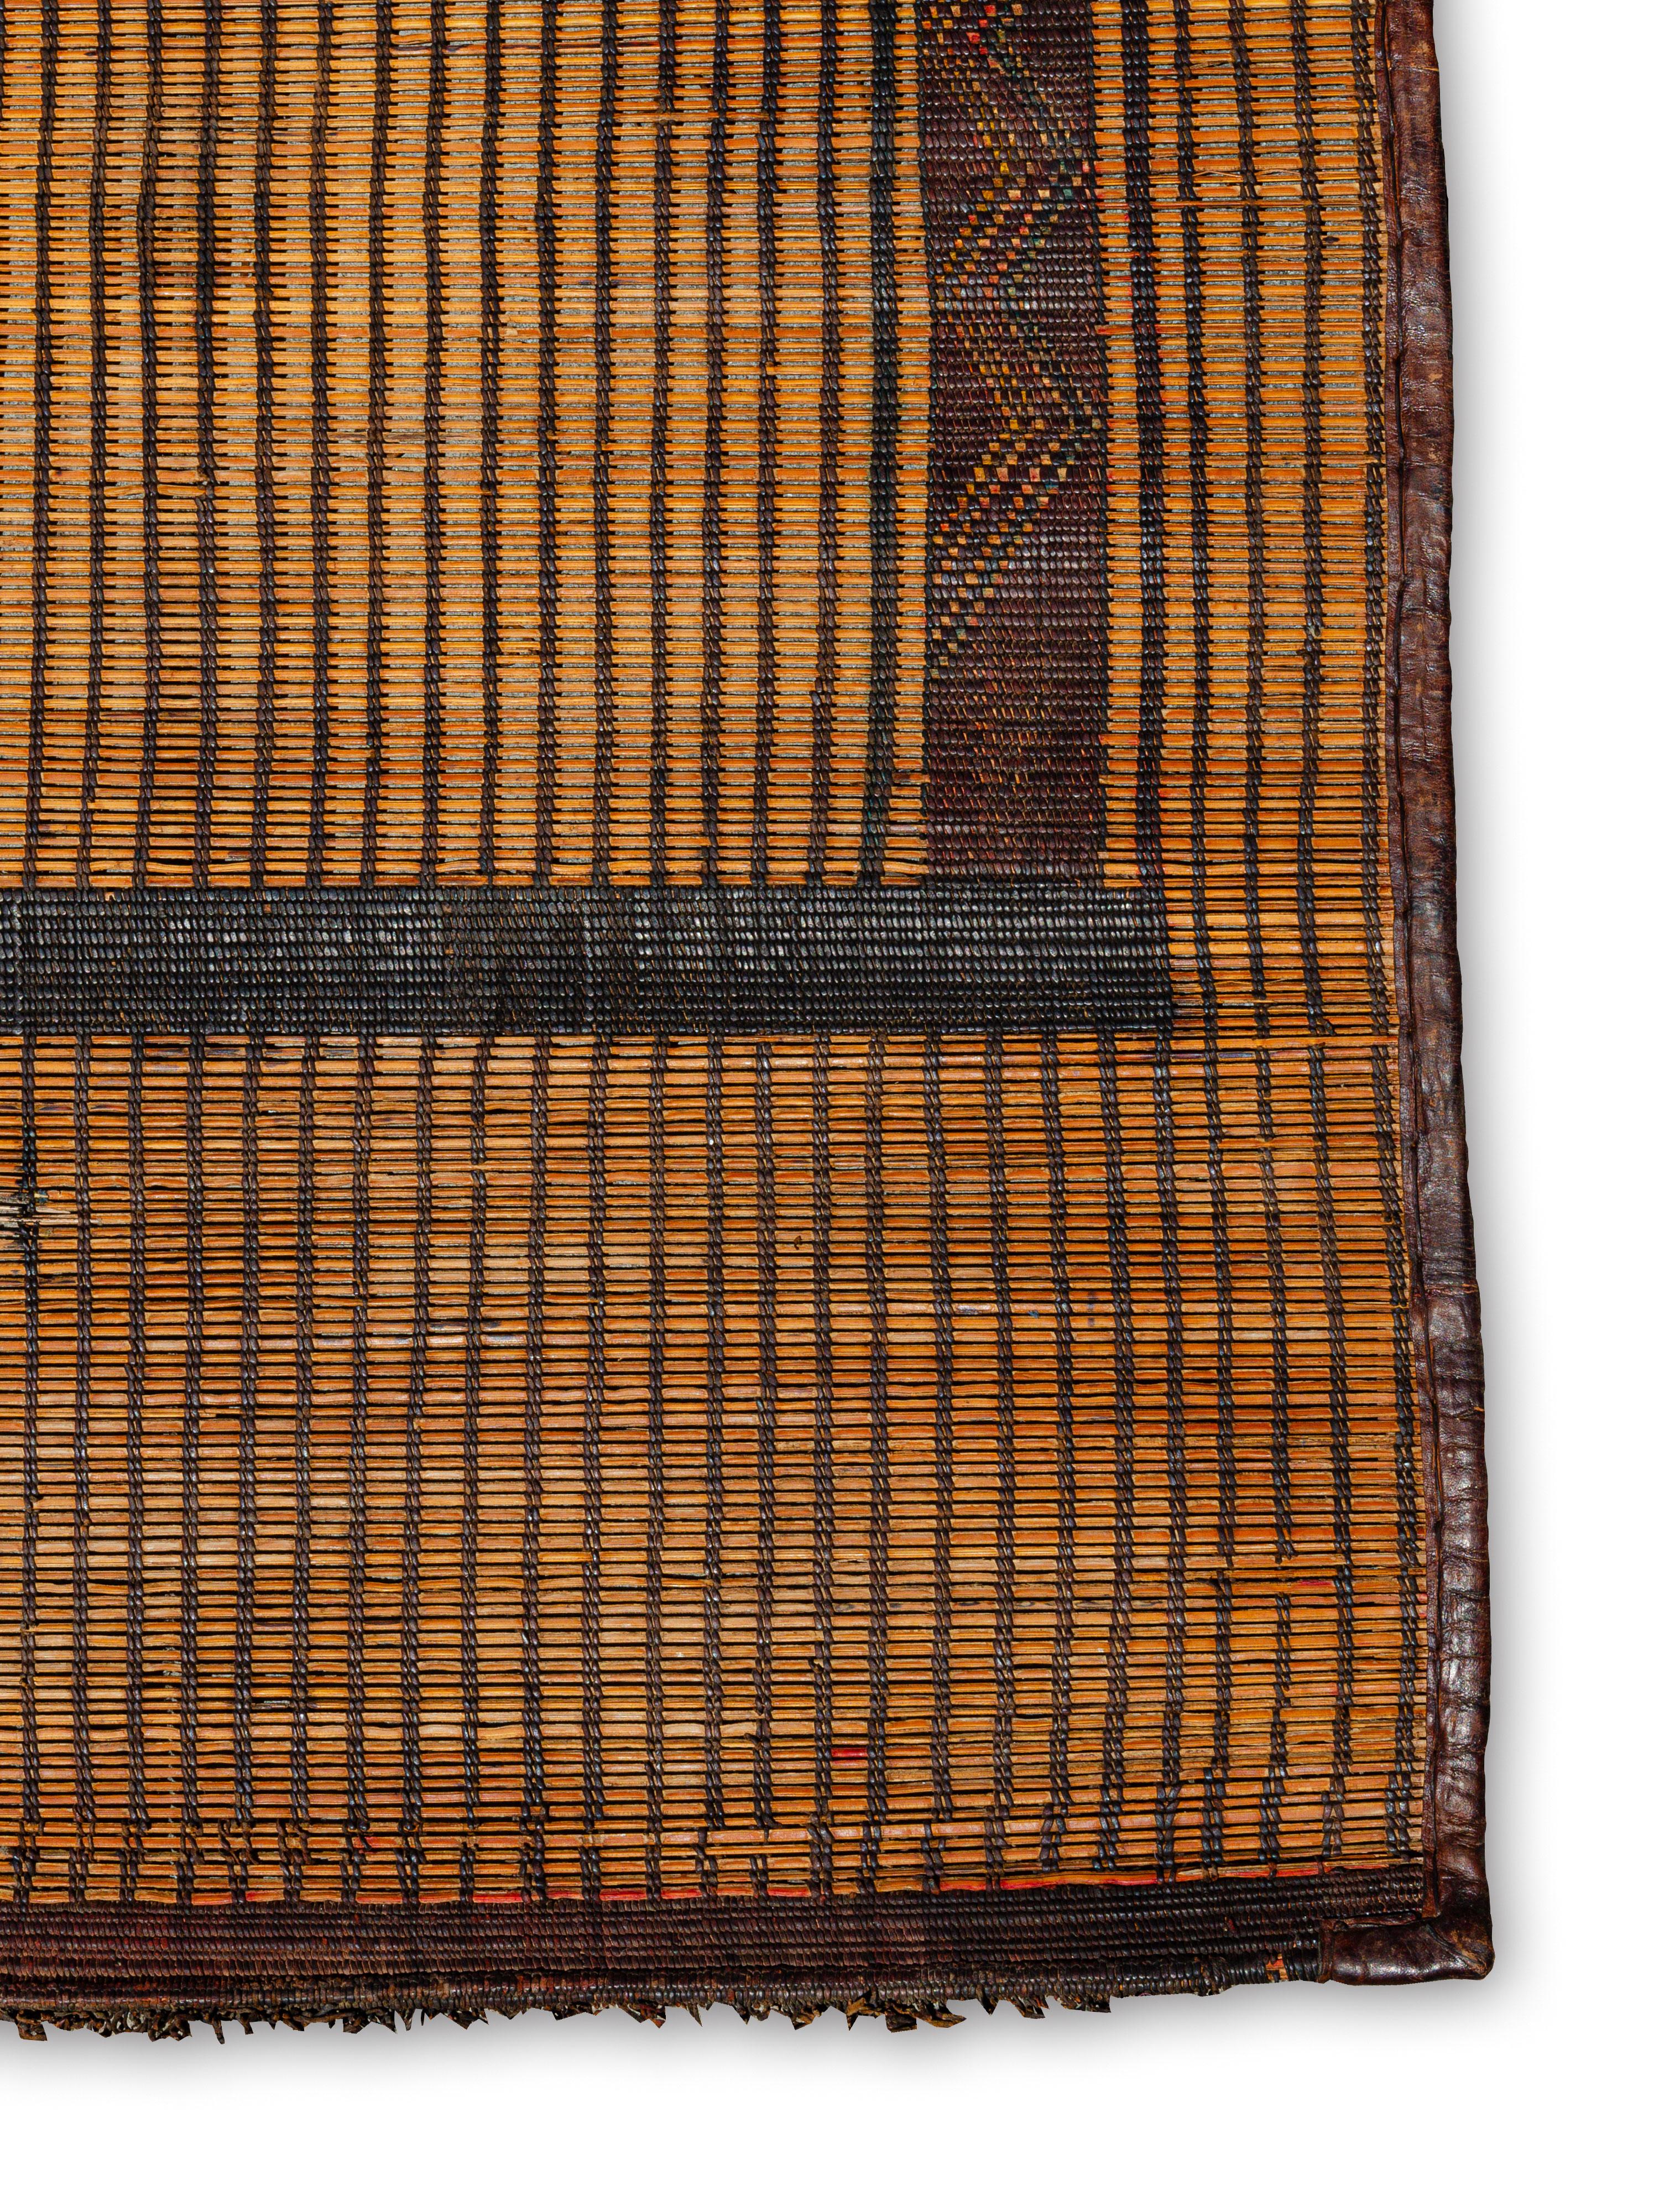 Hand-Woven Vintage Mid-Century Mauritanian Tuareg Mat curated by Breuckelen Berber For Sale